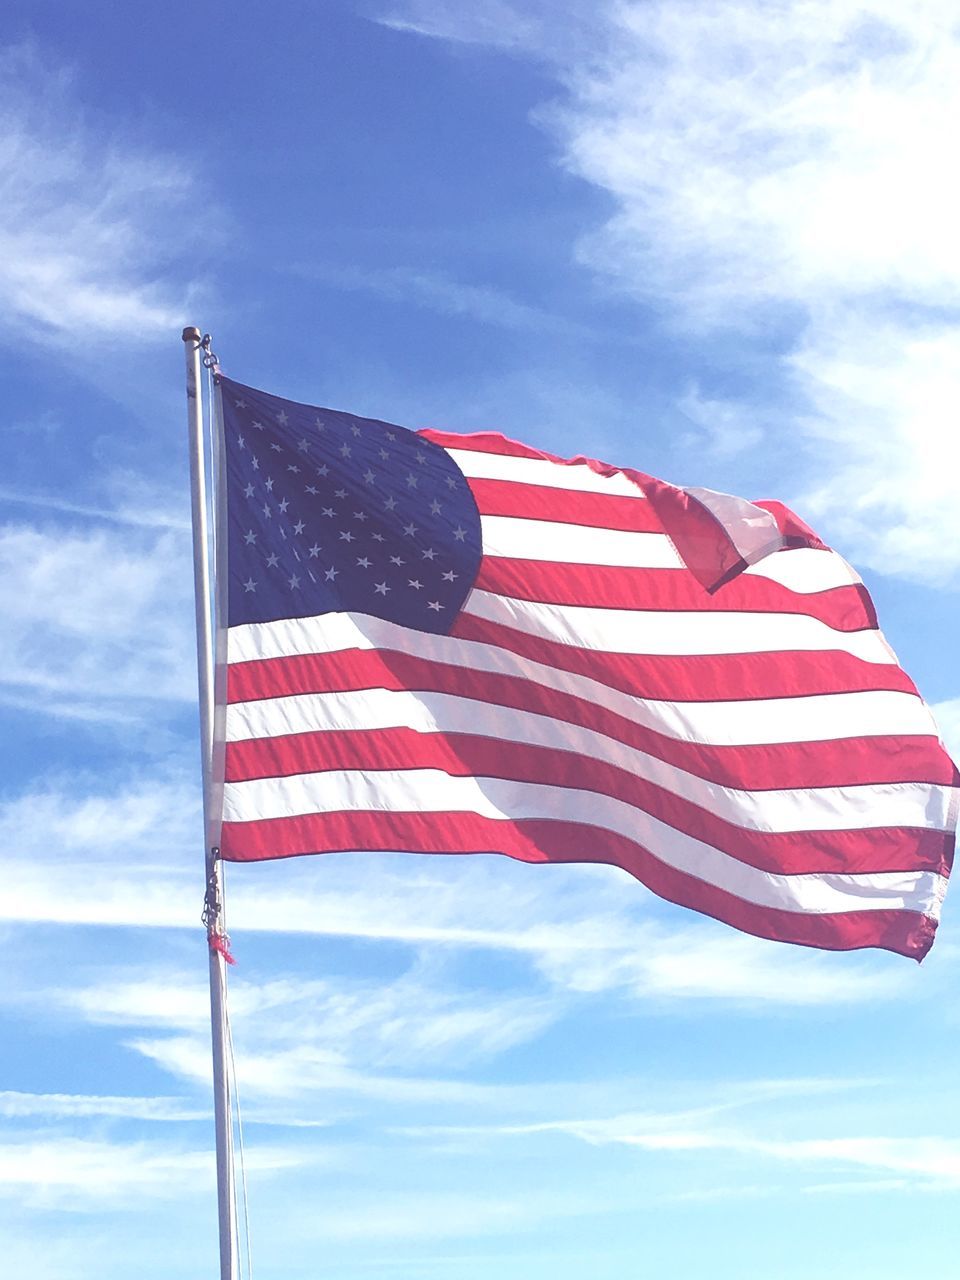 flag, patriotism, striped, stars and stripes, flag pole, sky, low angle view, no people, cloud - sky, day, outdoors, close-up